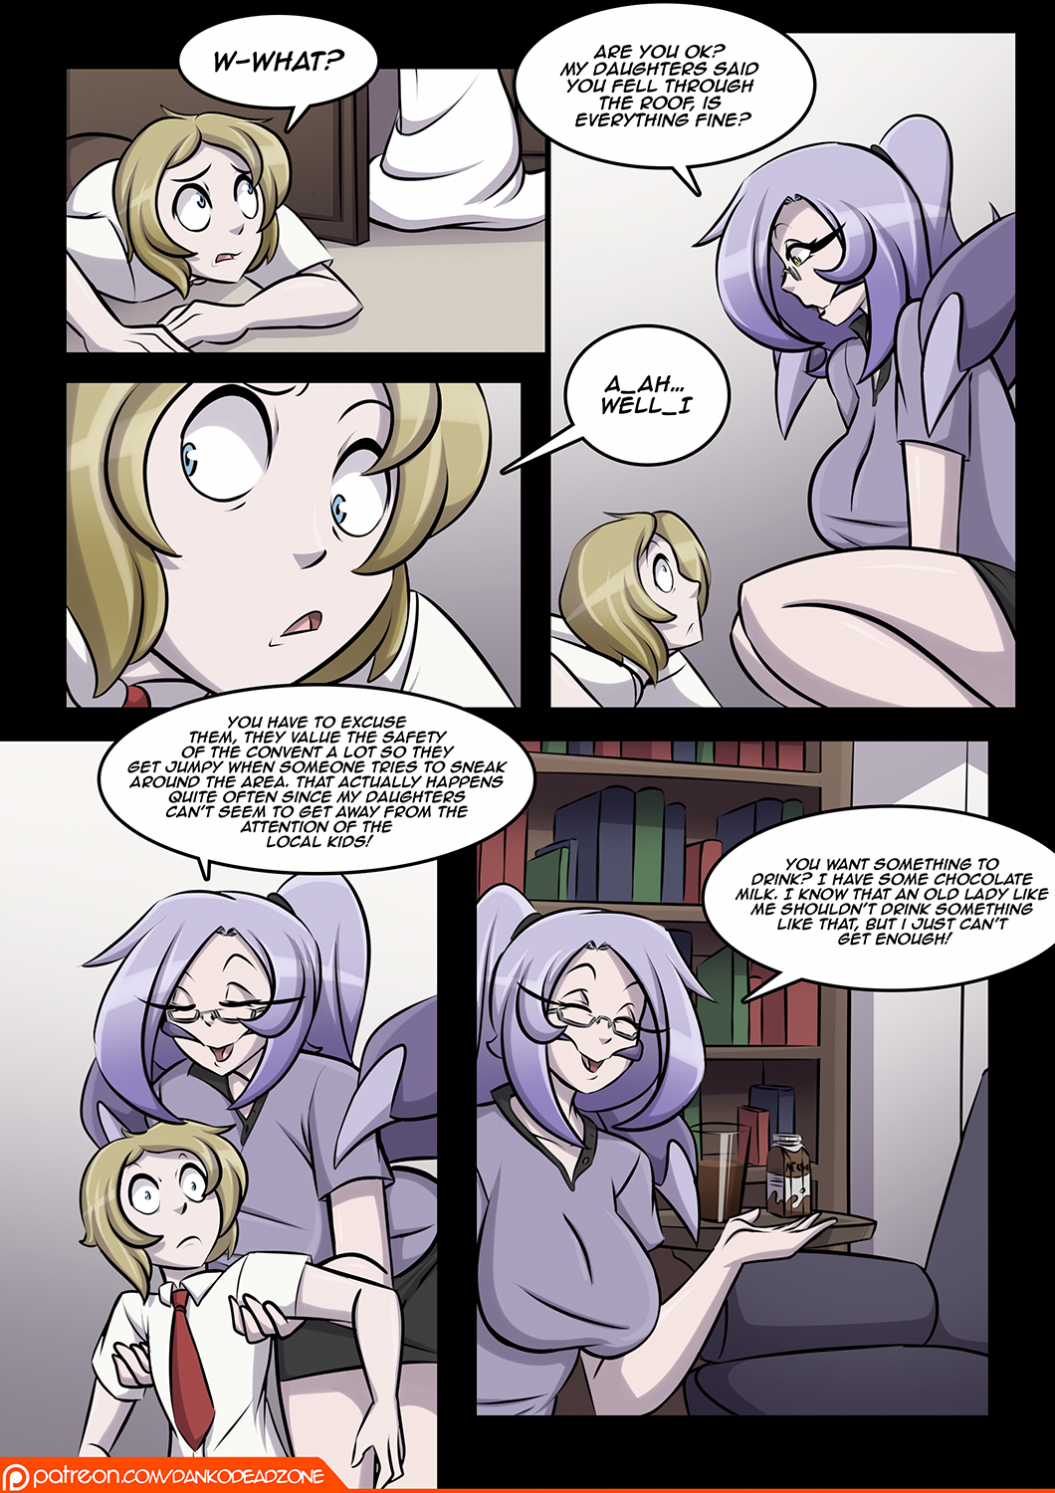 Lady of the Night - Issue 0 porn comic picture 4